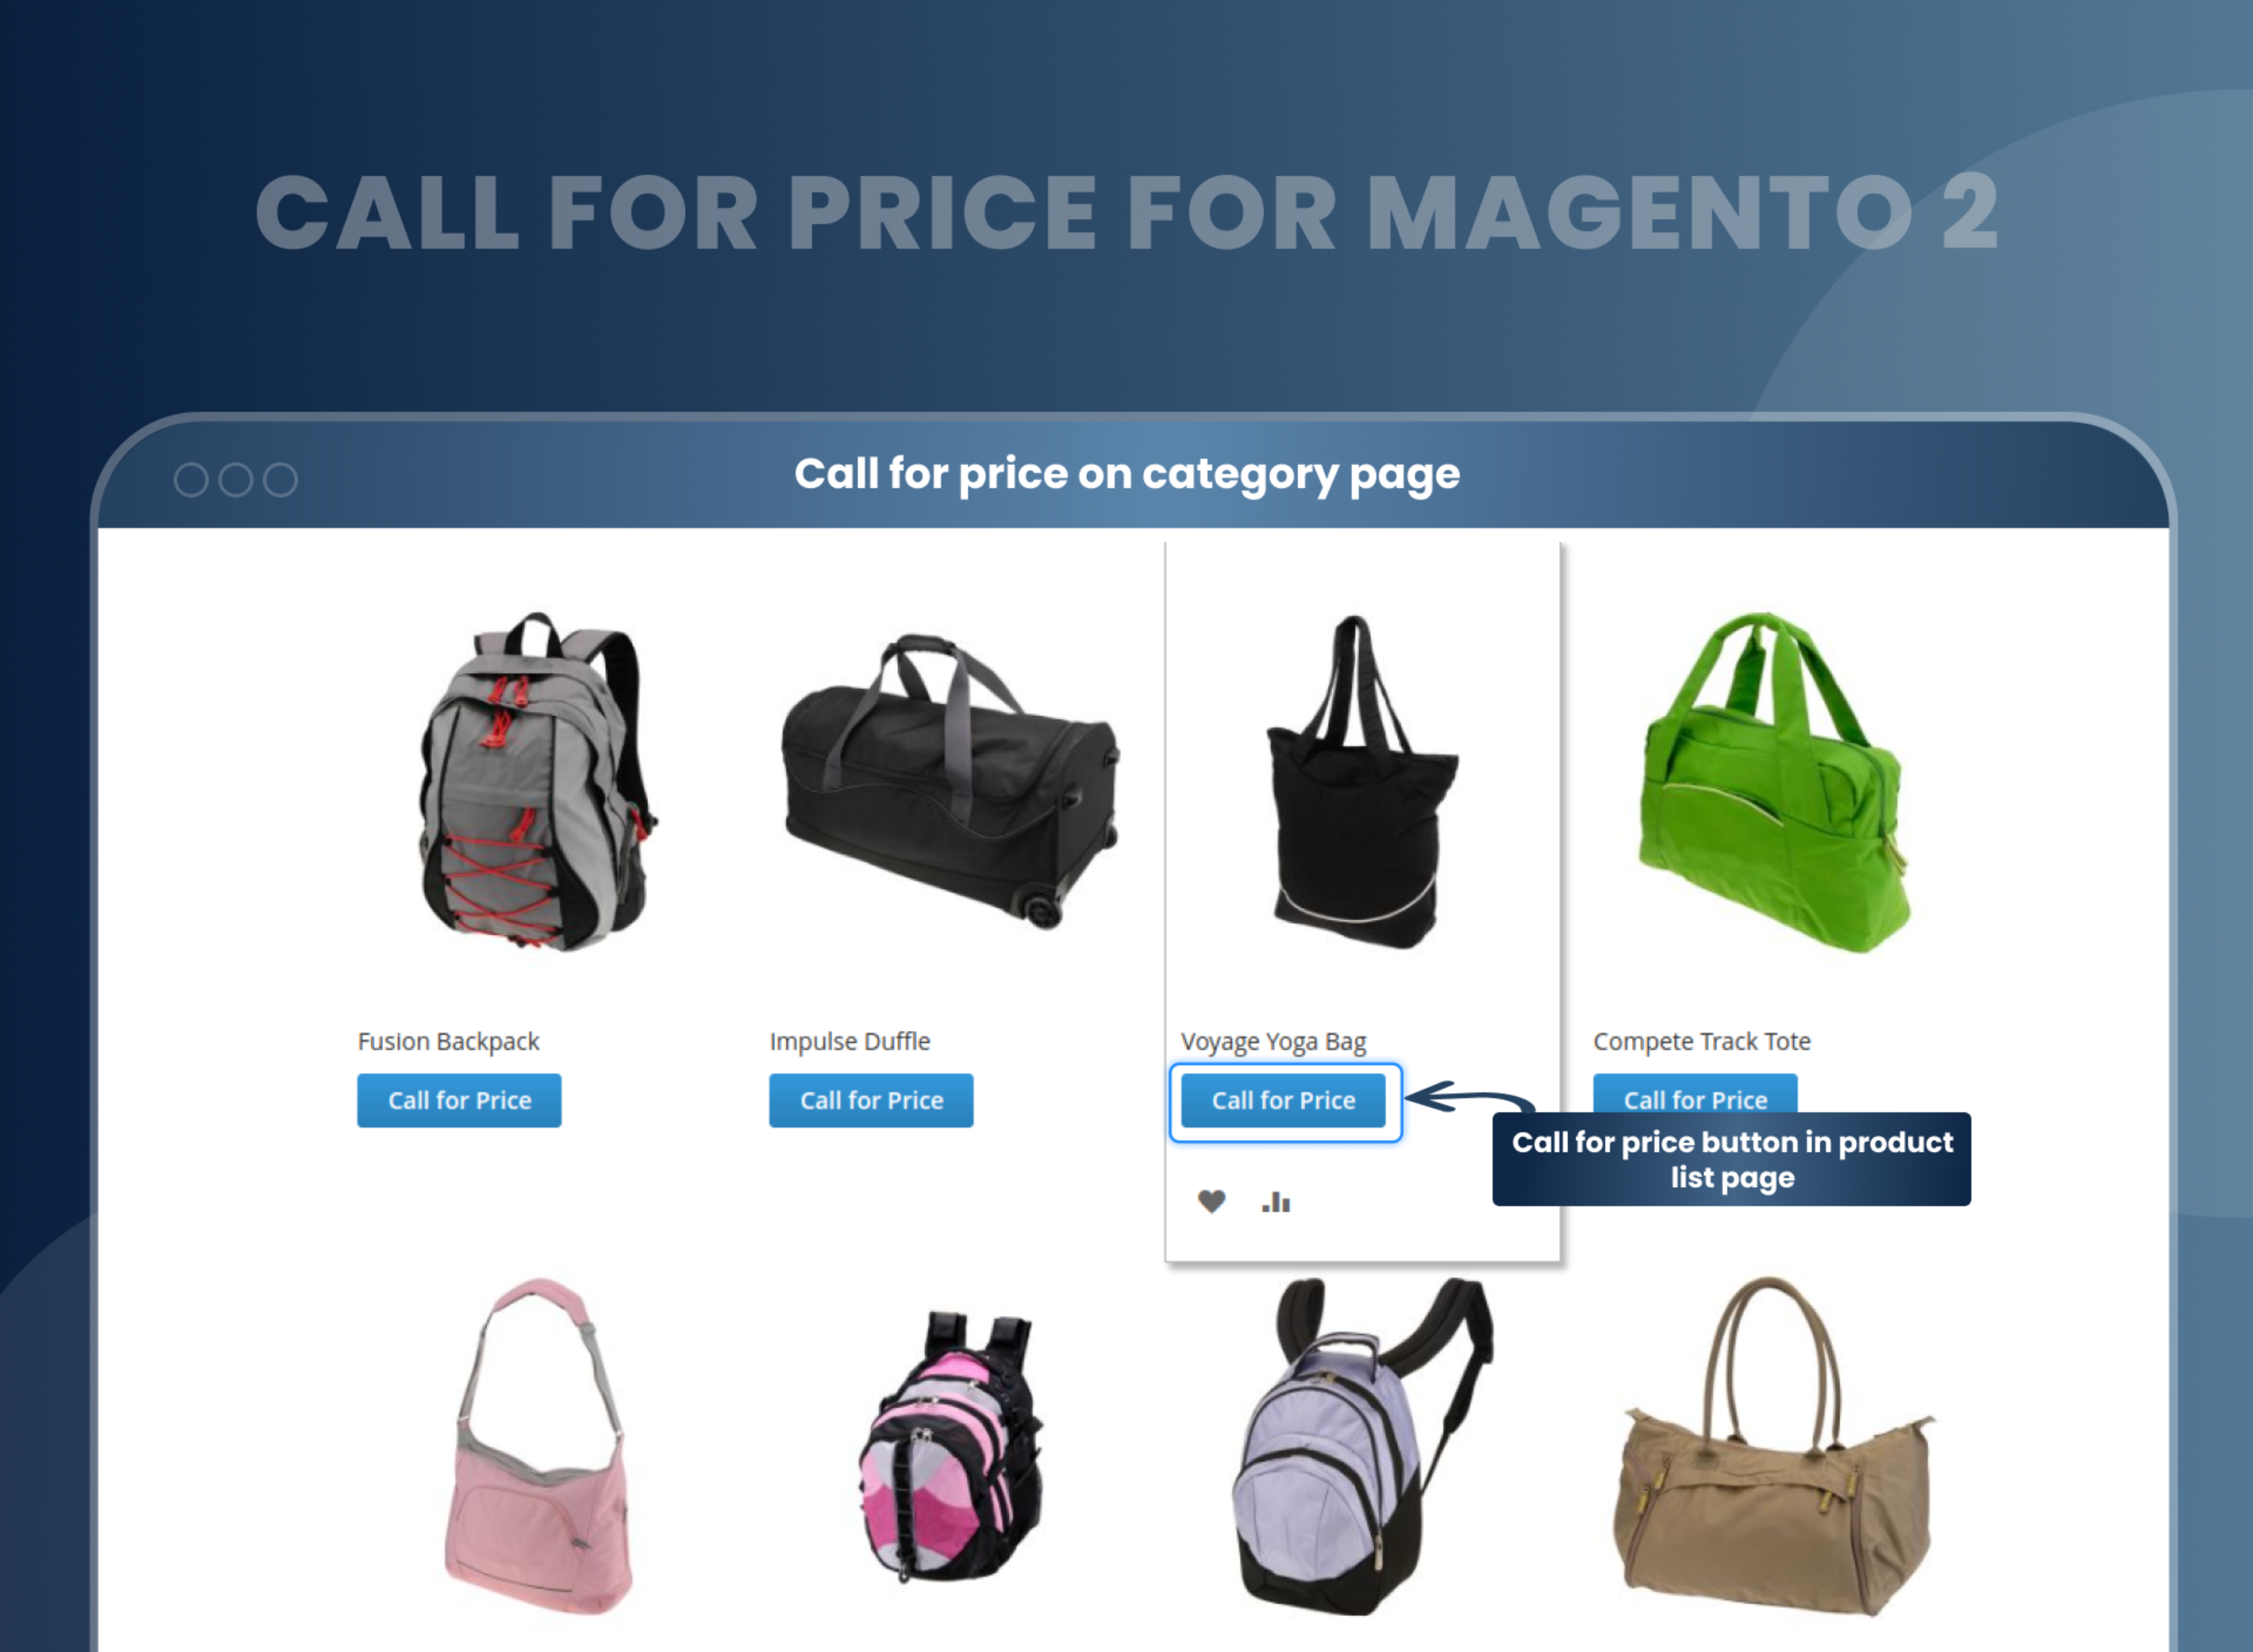 Call for price on category page